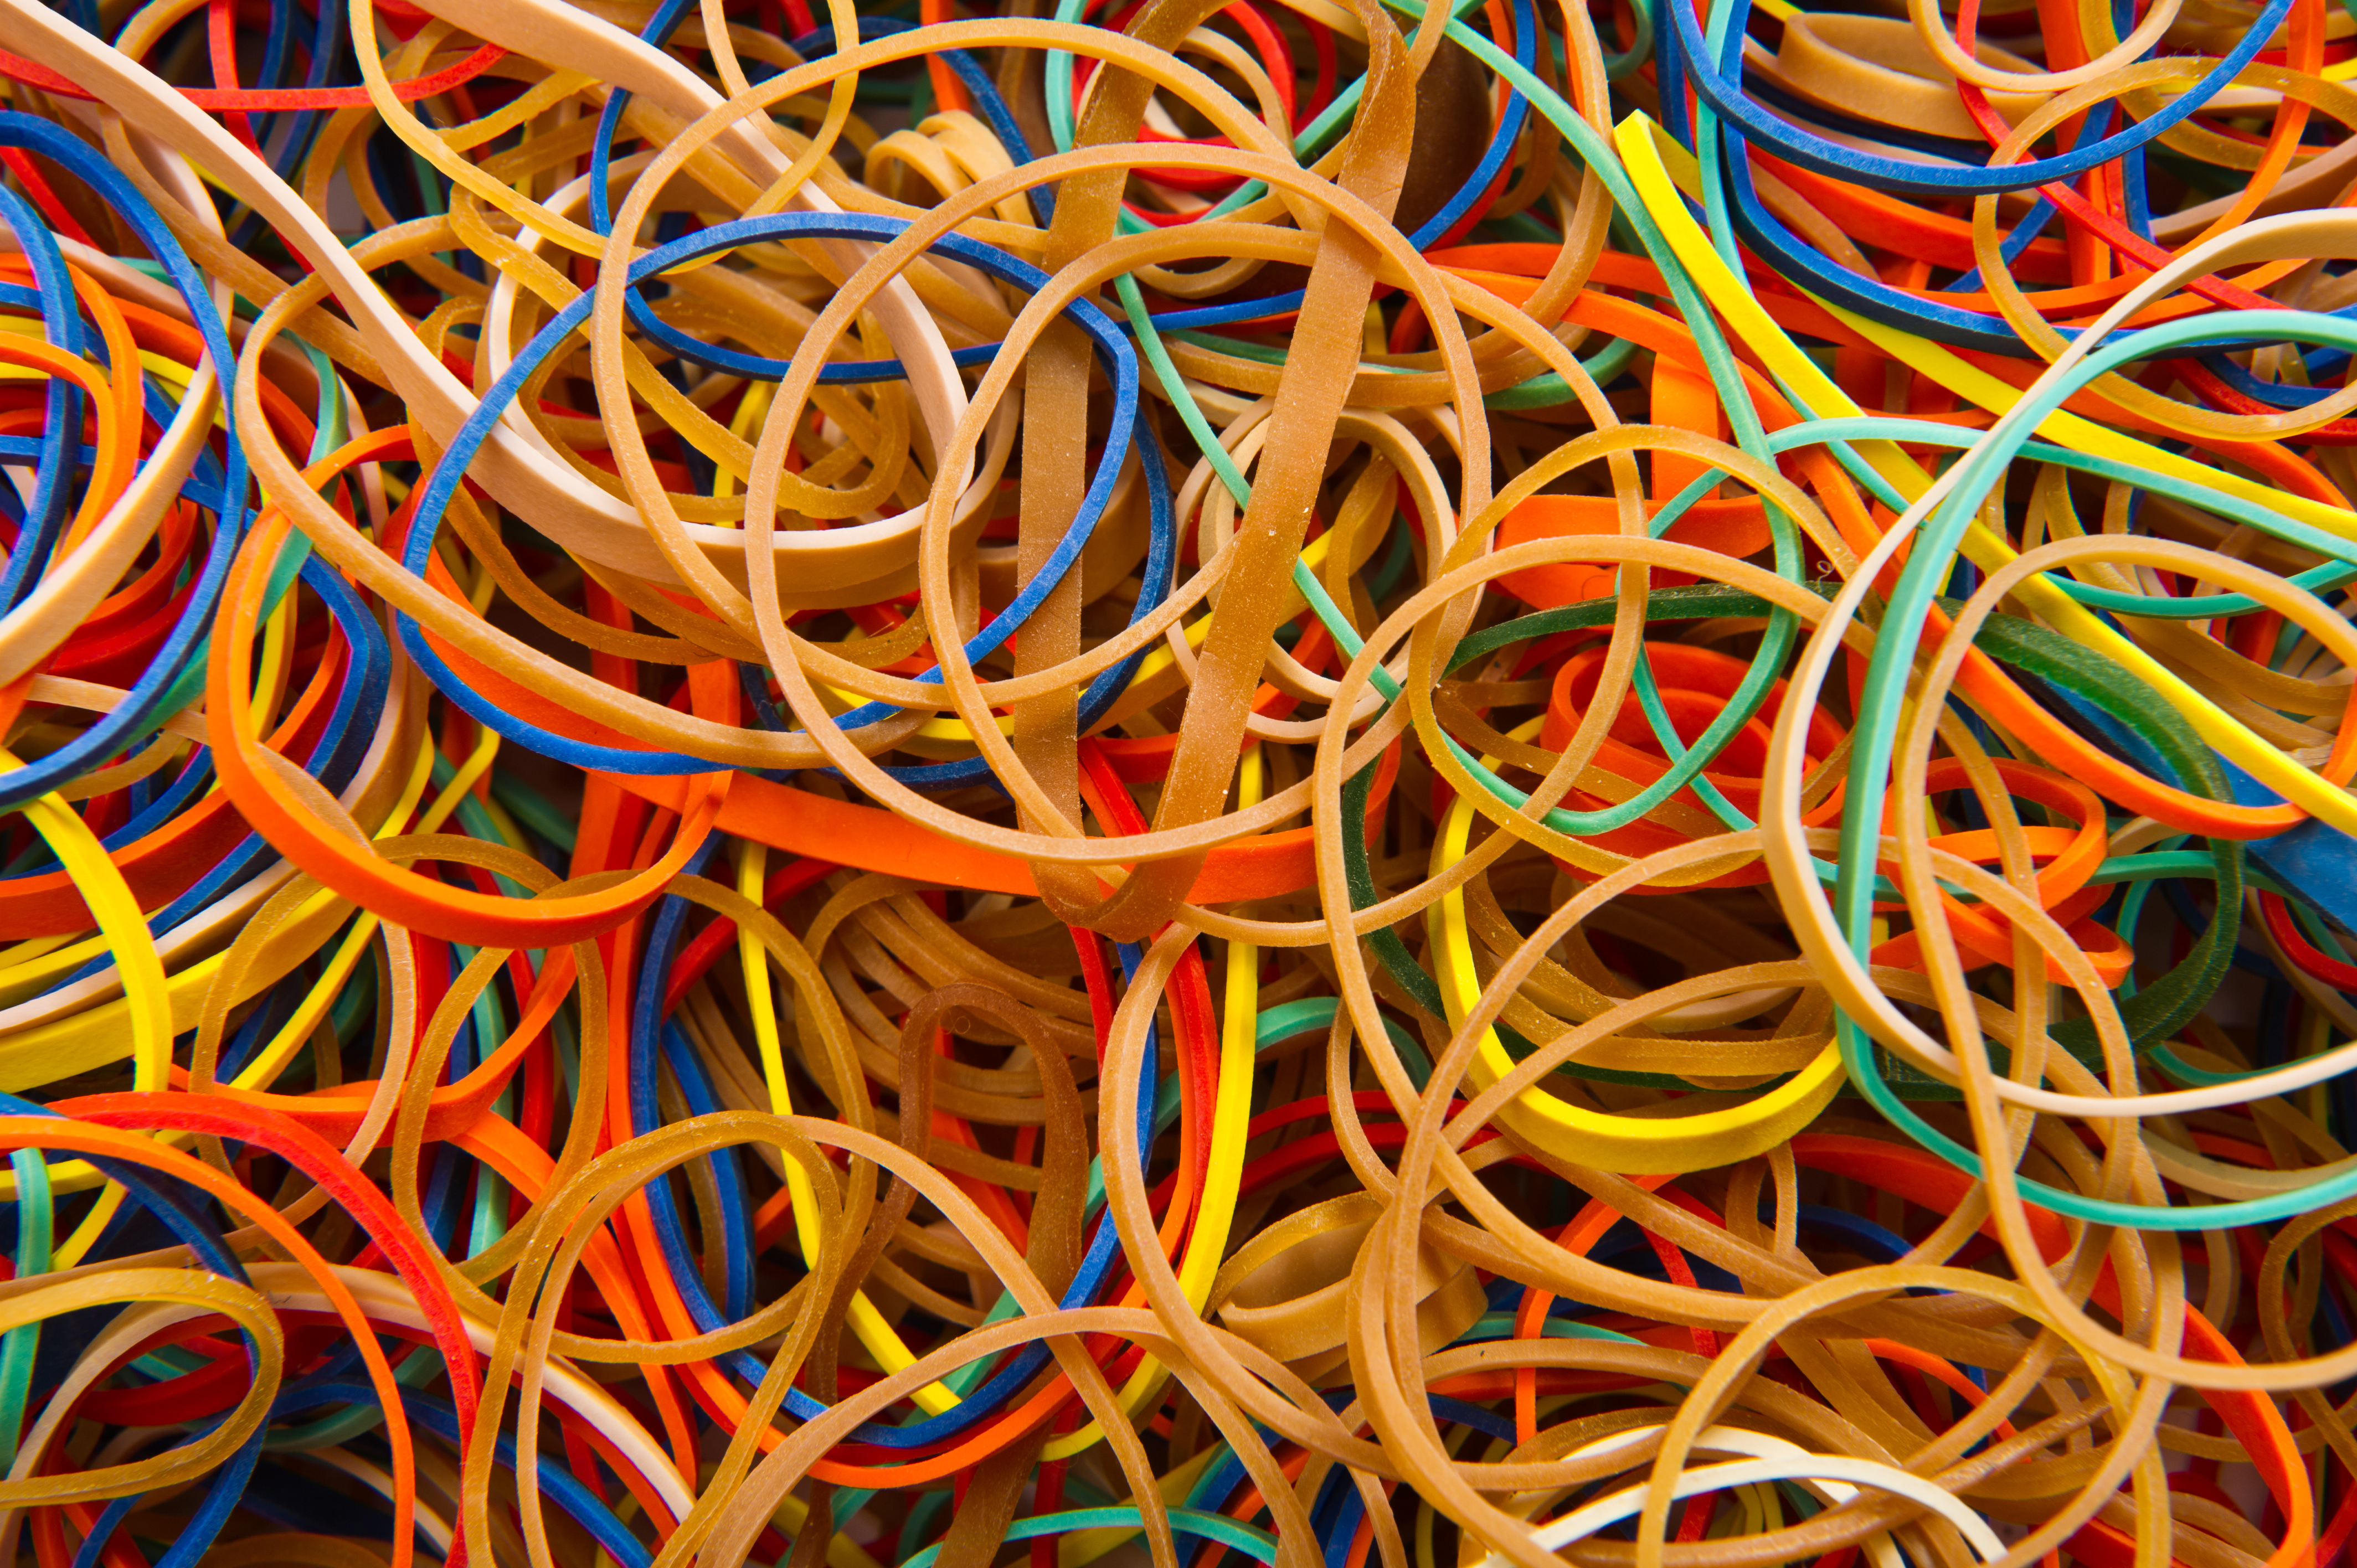 File:Rubber bands - Colors - Studio photo 2011.jpg - Wikimedia Commons